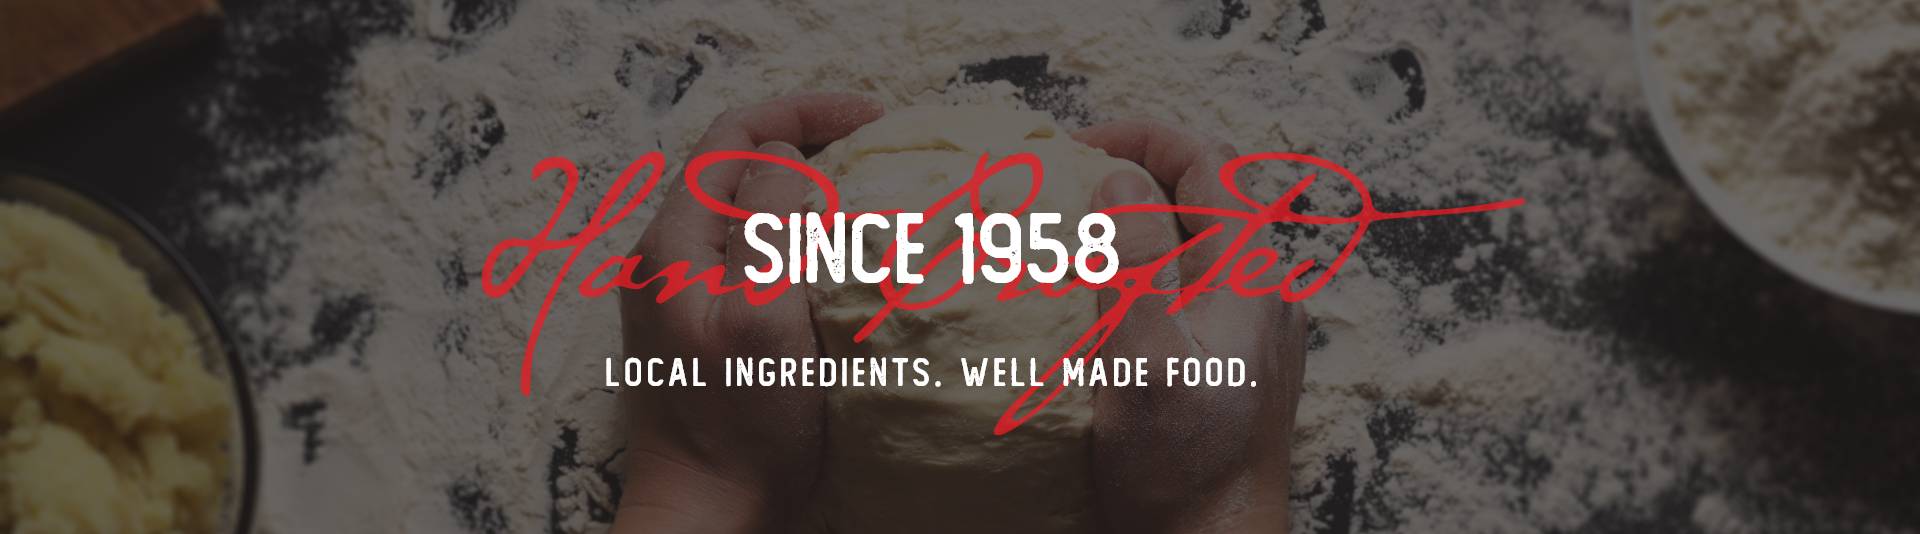 Making Pizza since 1958